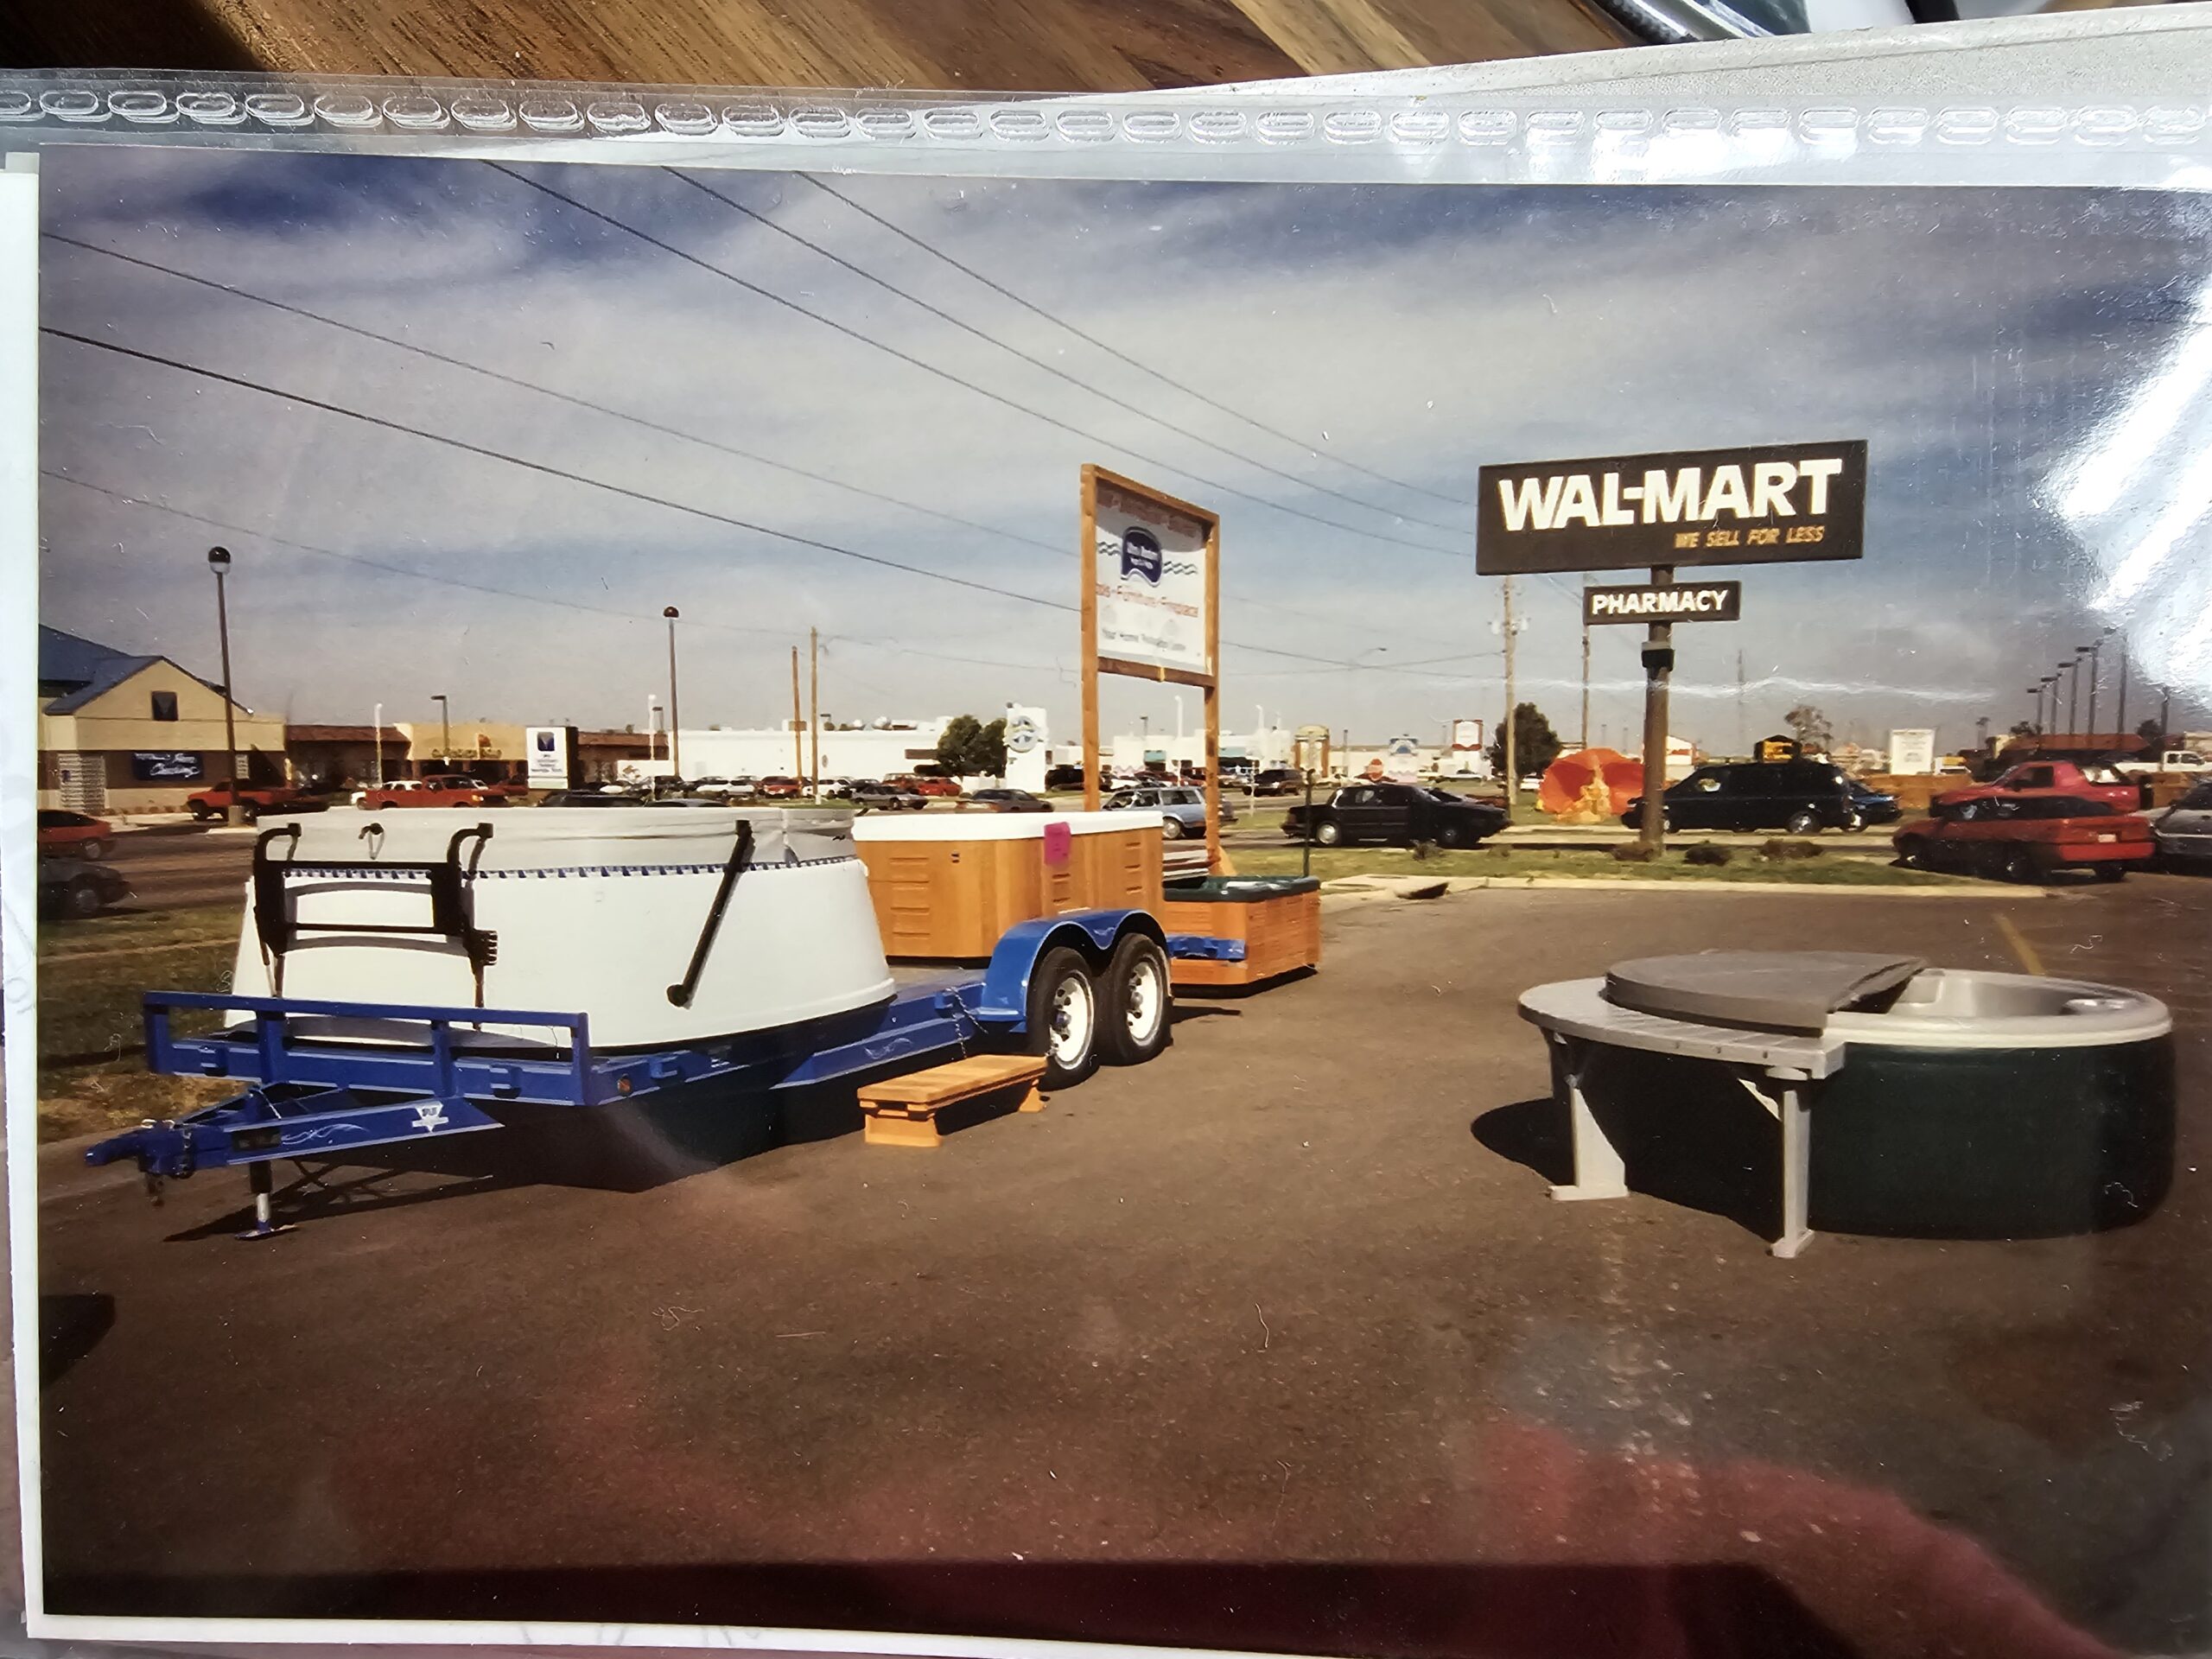 Check out these photos from 1995 when we used to do Walmart shows!